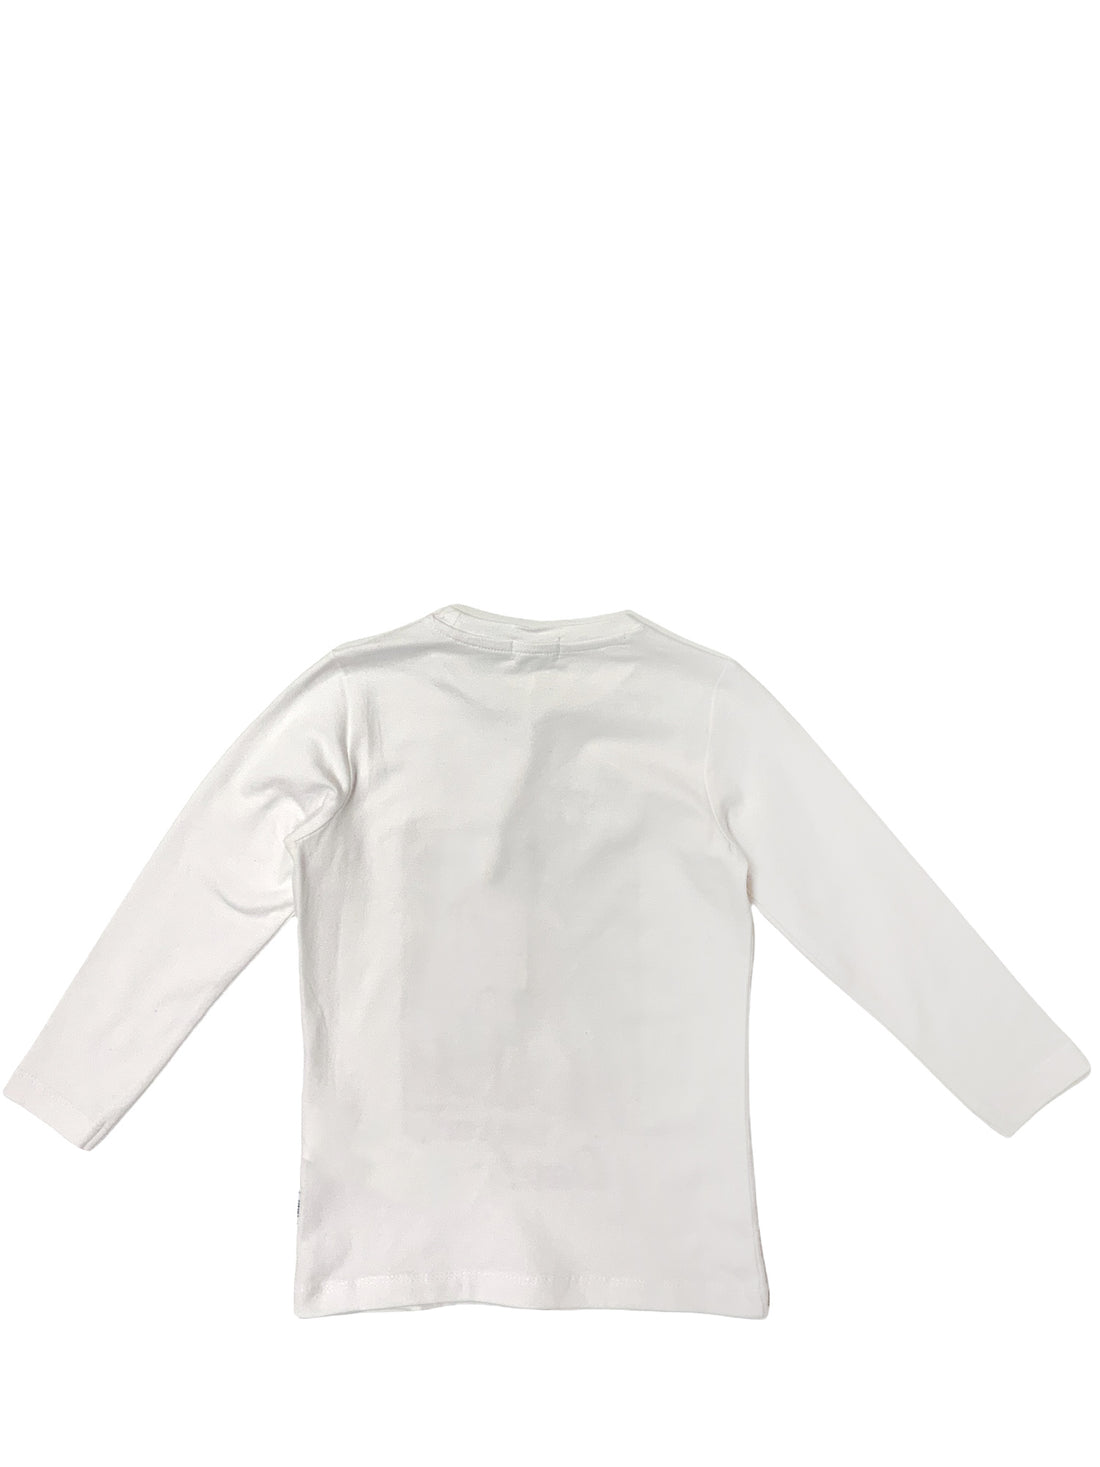 Maglie Bianco Melby